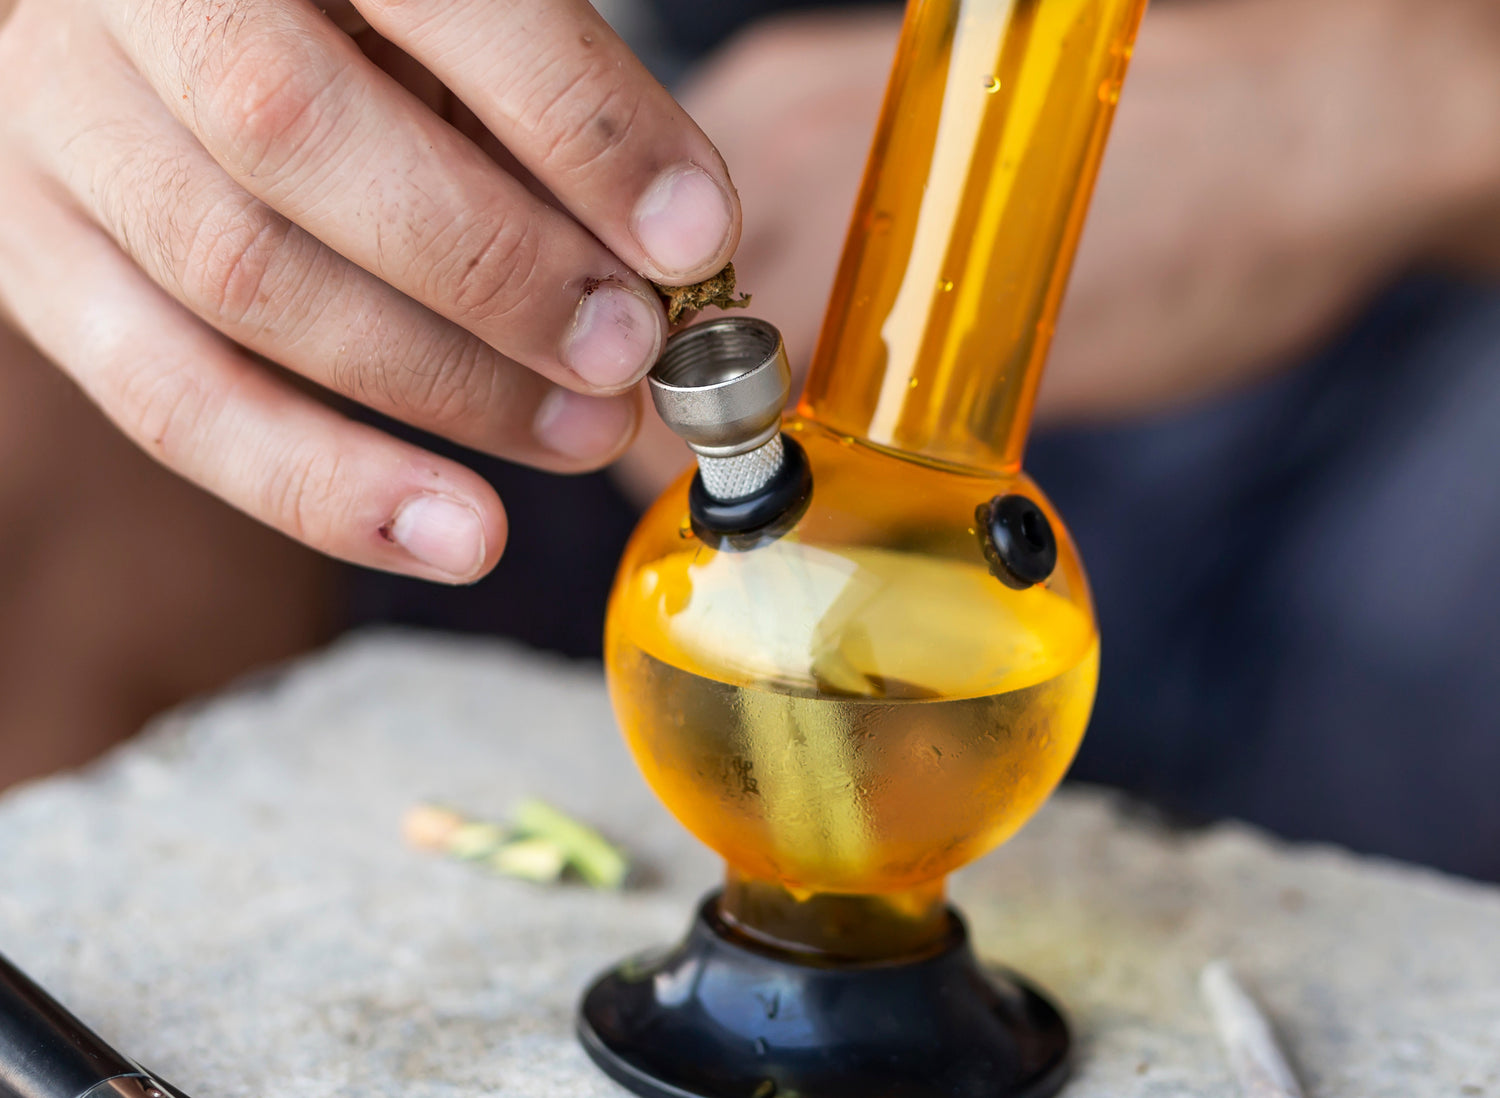 How to Pack &amp; Smoke The Perfect Bowl